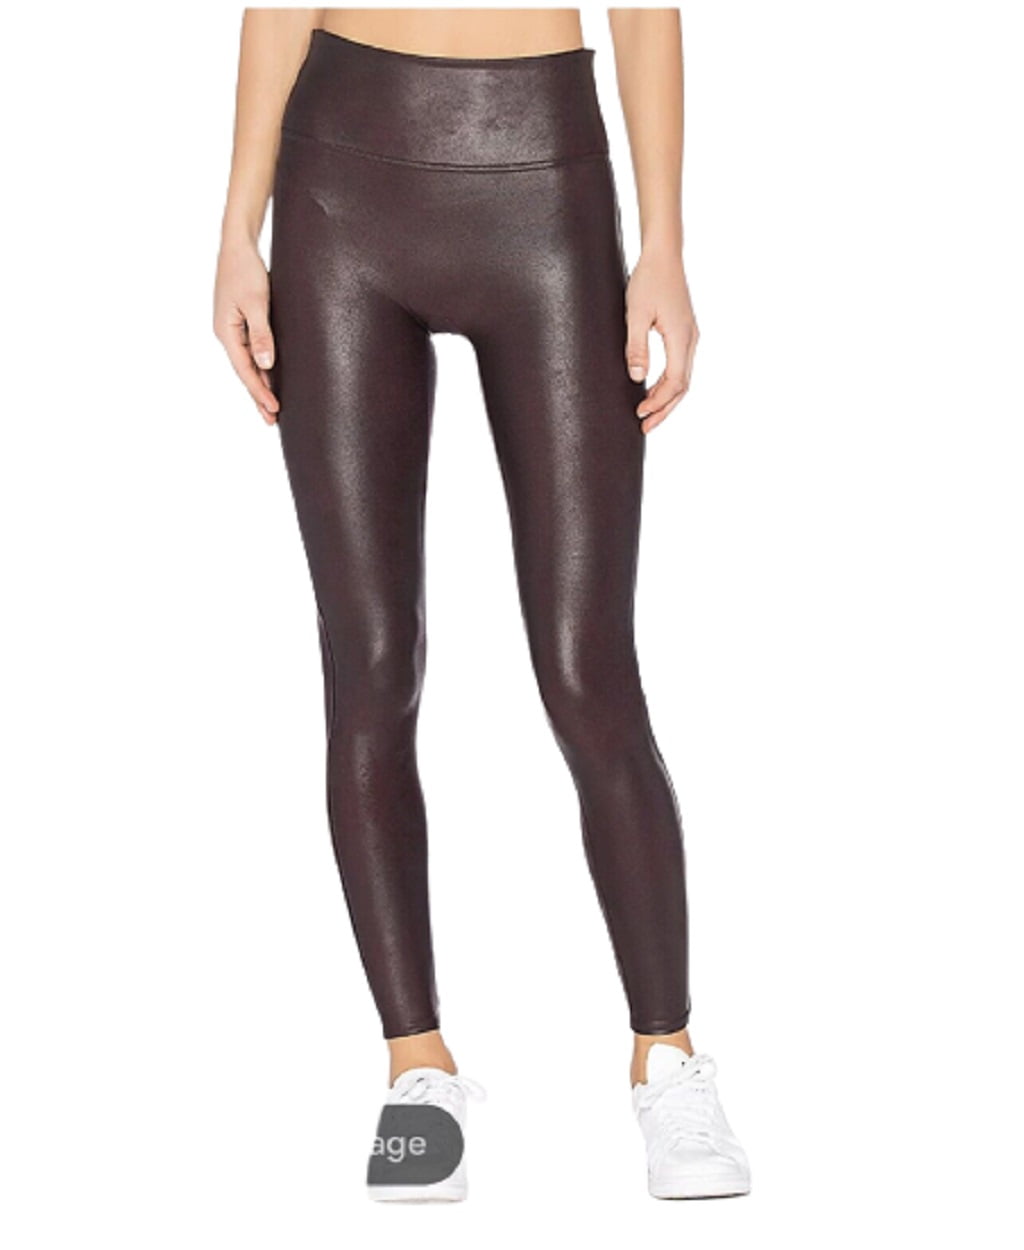 Simply Vera Wang Shaping Legging Womens High Waist Faux Leather-Purple-Large-NEW